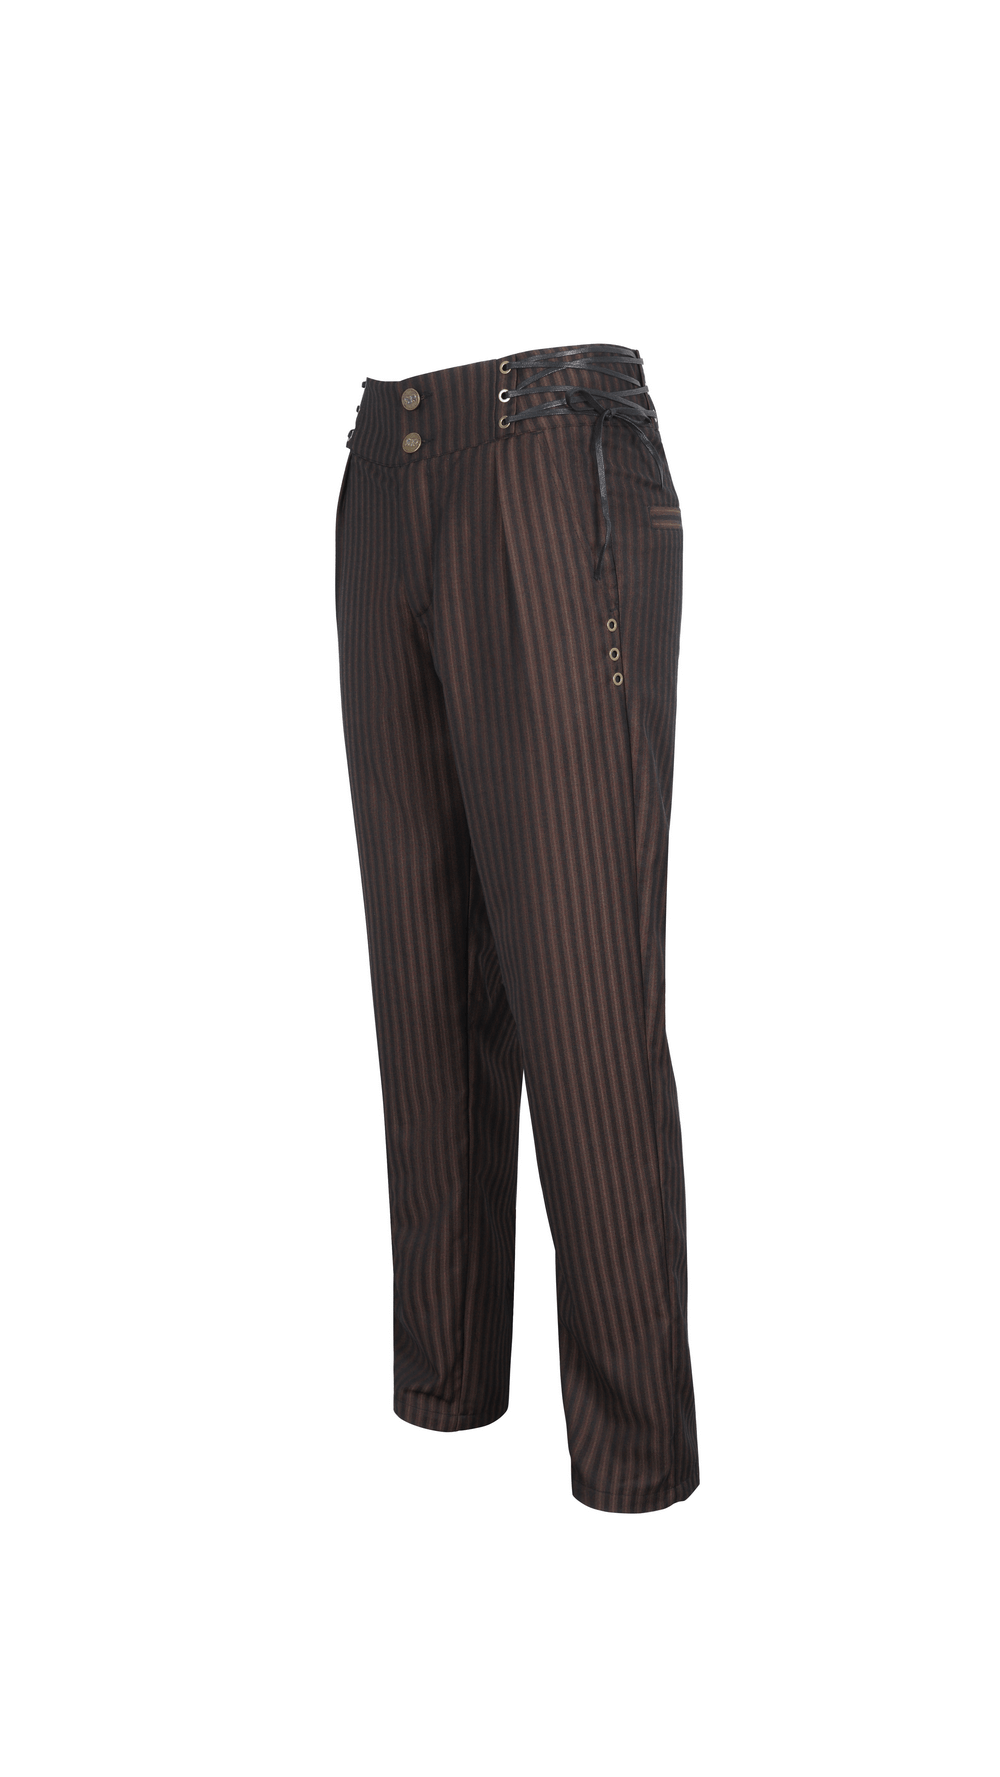 Chic Brown Striped Trousers with Lace-Up Sides